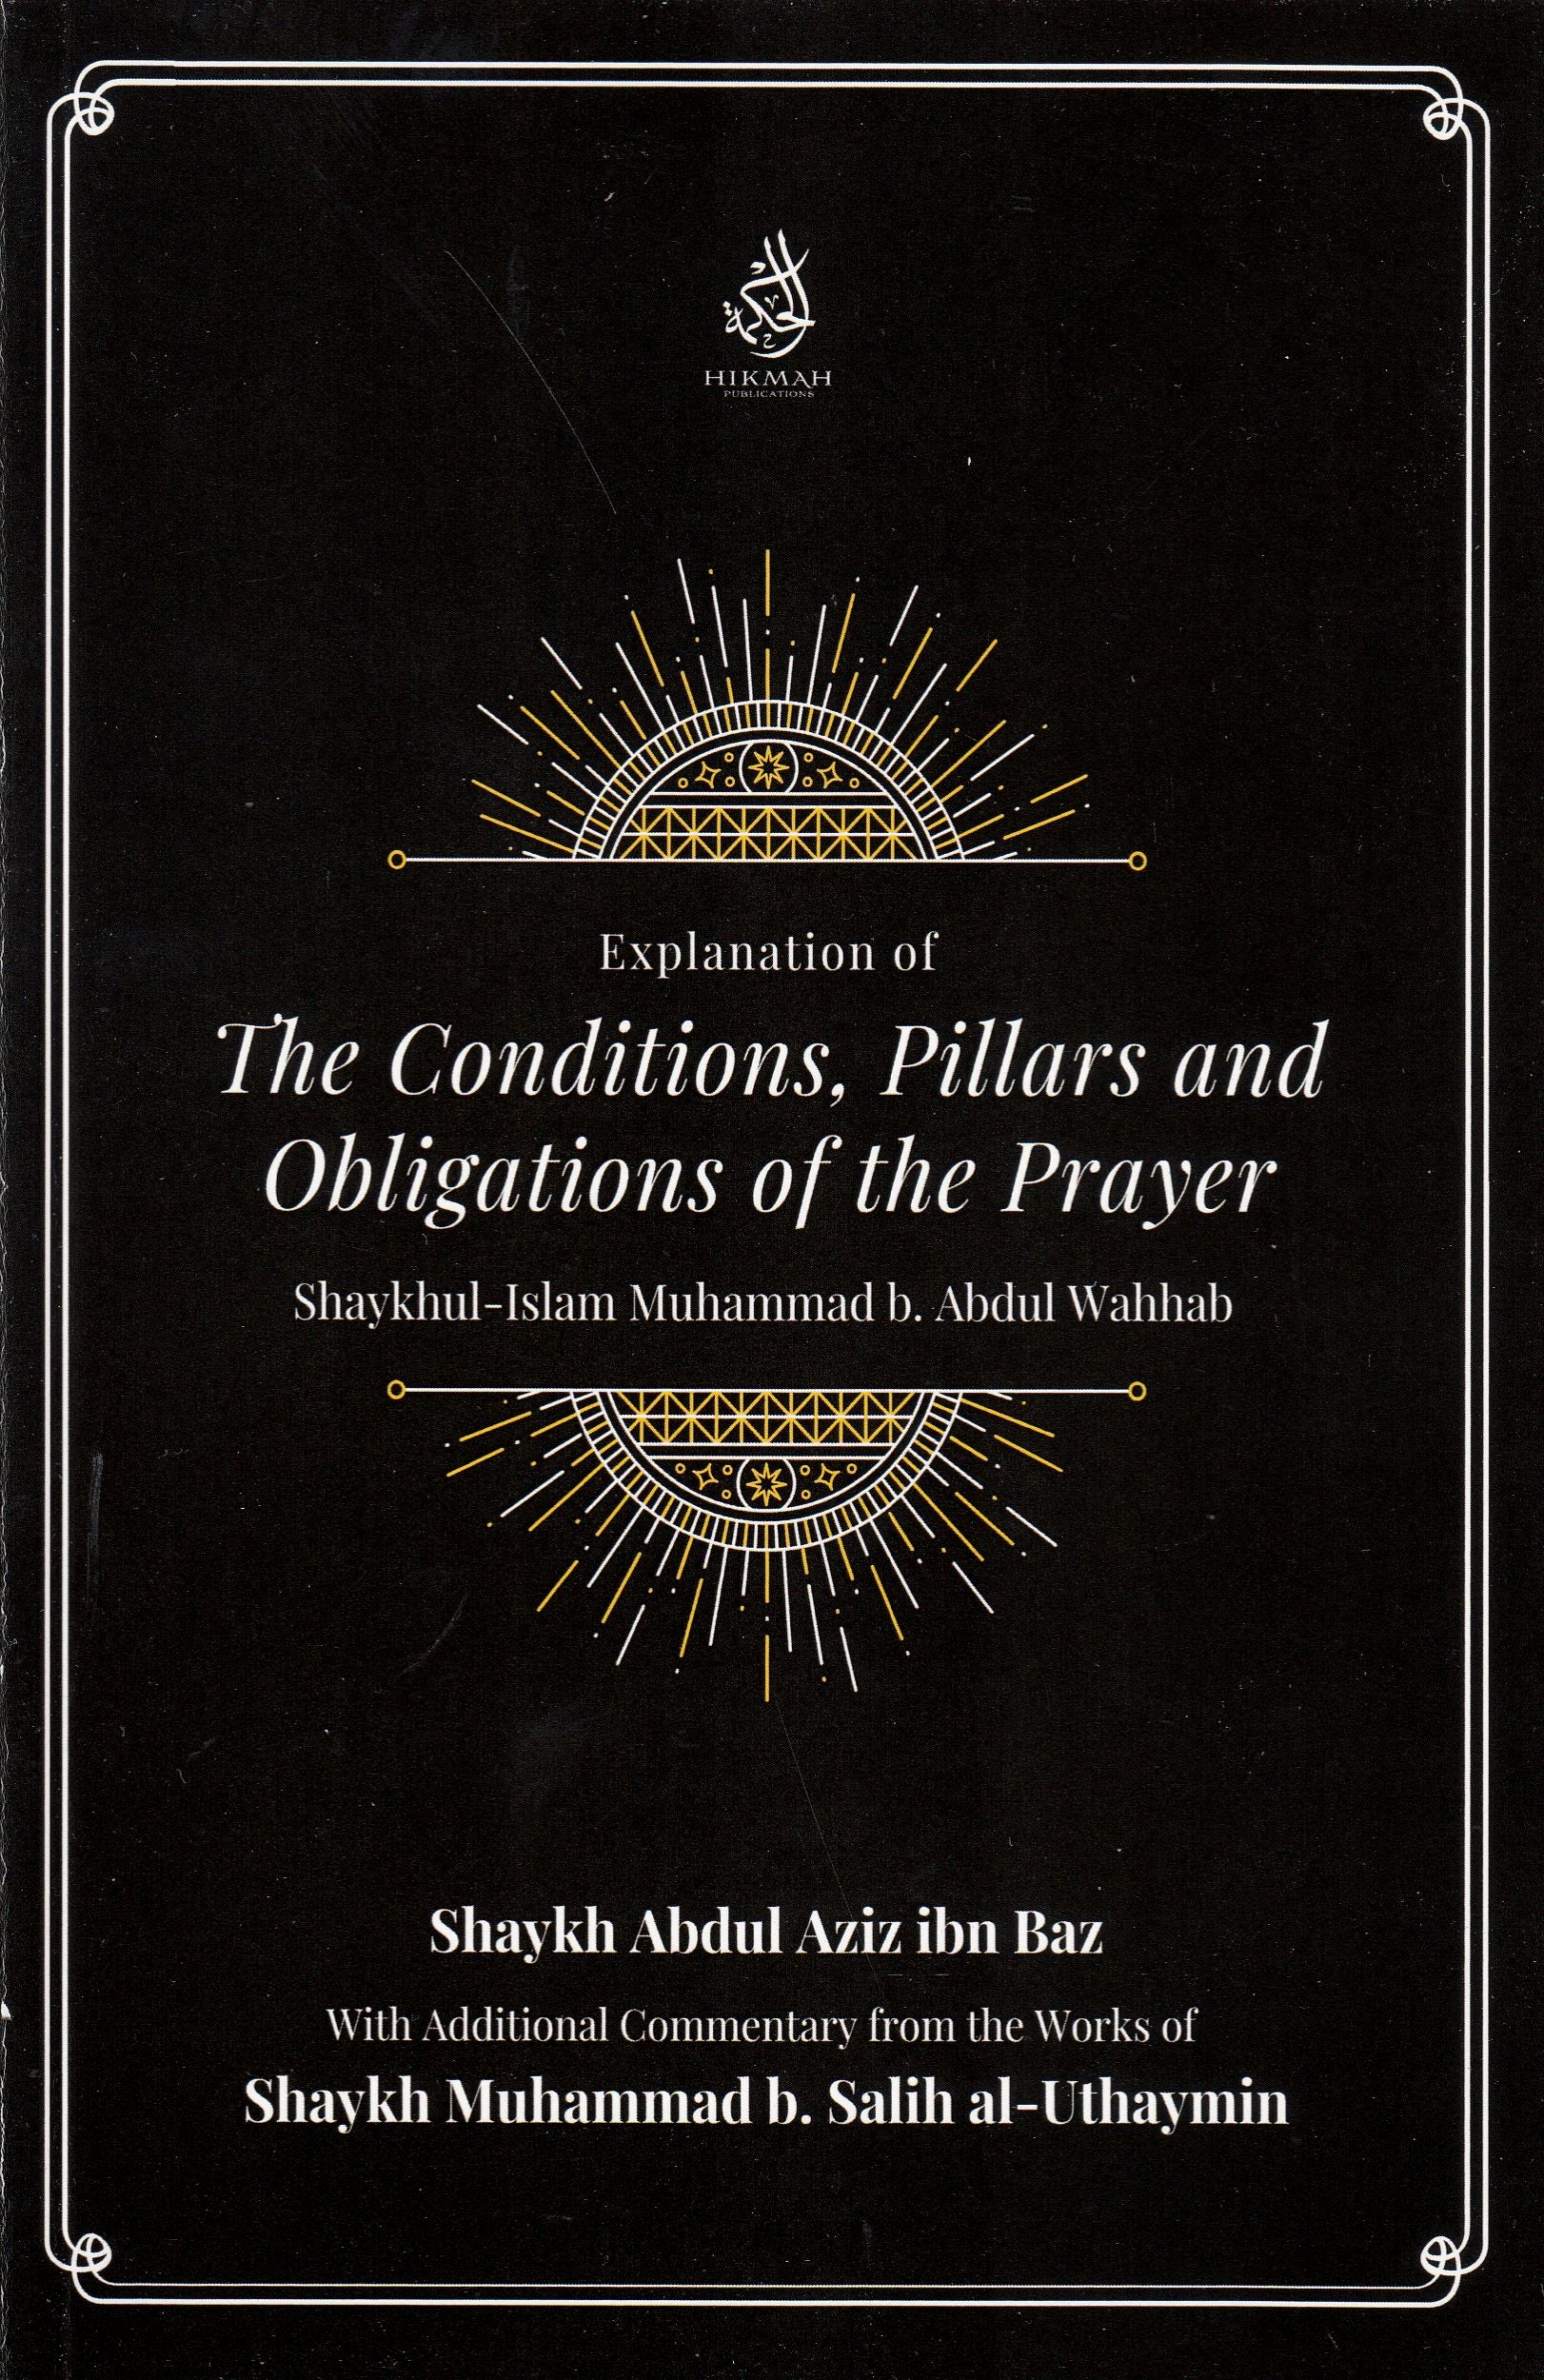 Explanation of The Conditions, Pillars and Obligations of the Prayer